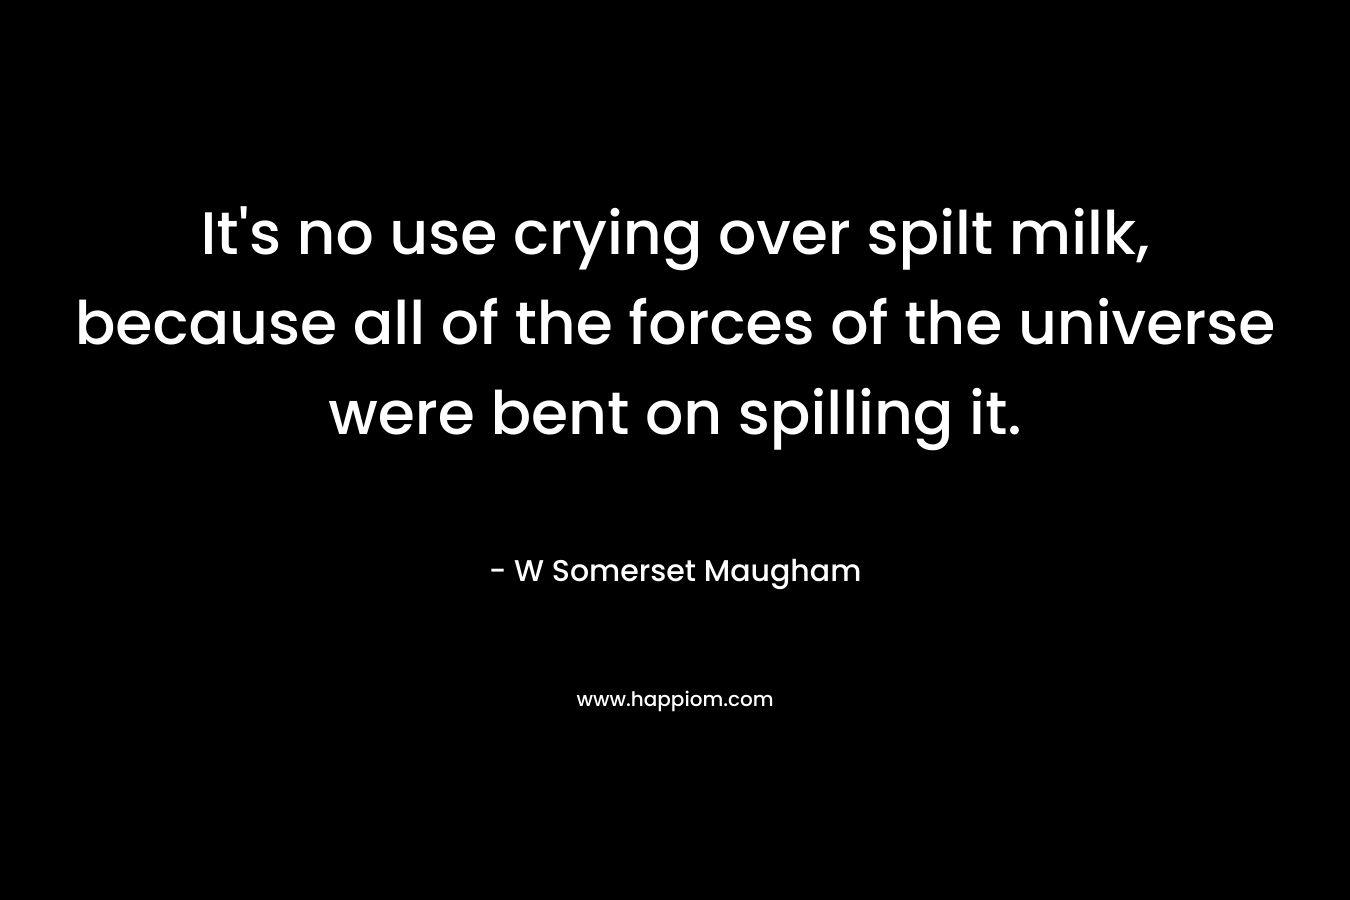 It's no use crying over spilt milk, because all of the forces of the universe were bent on spilling it.